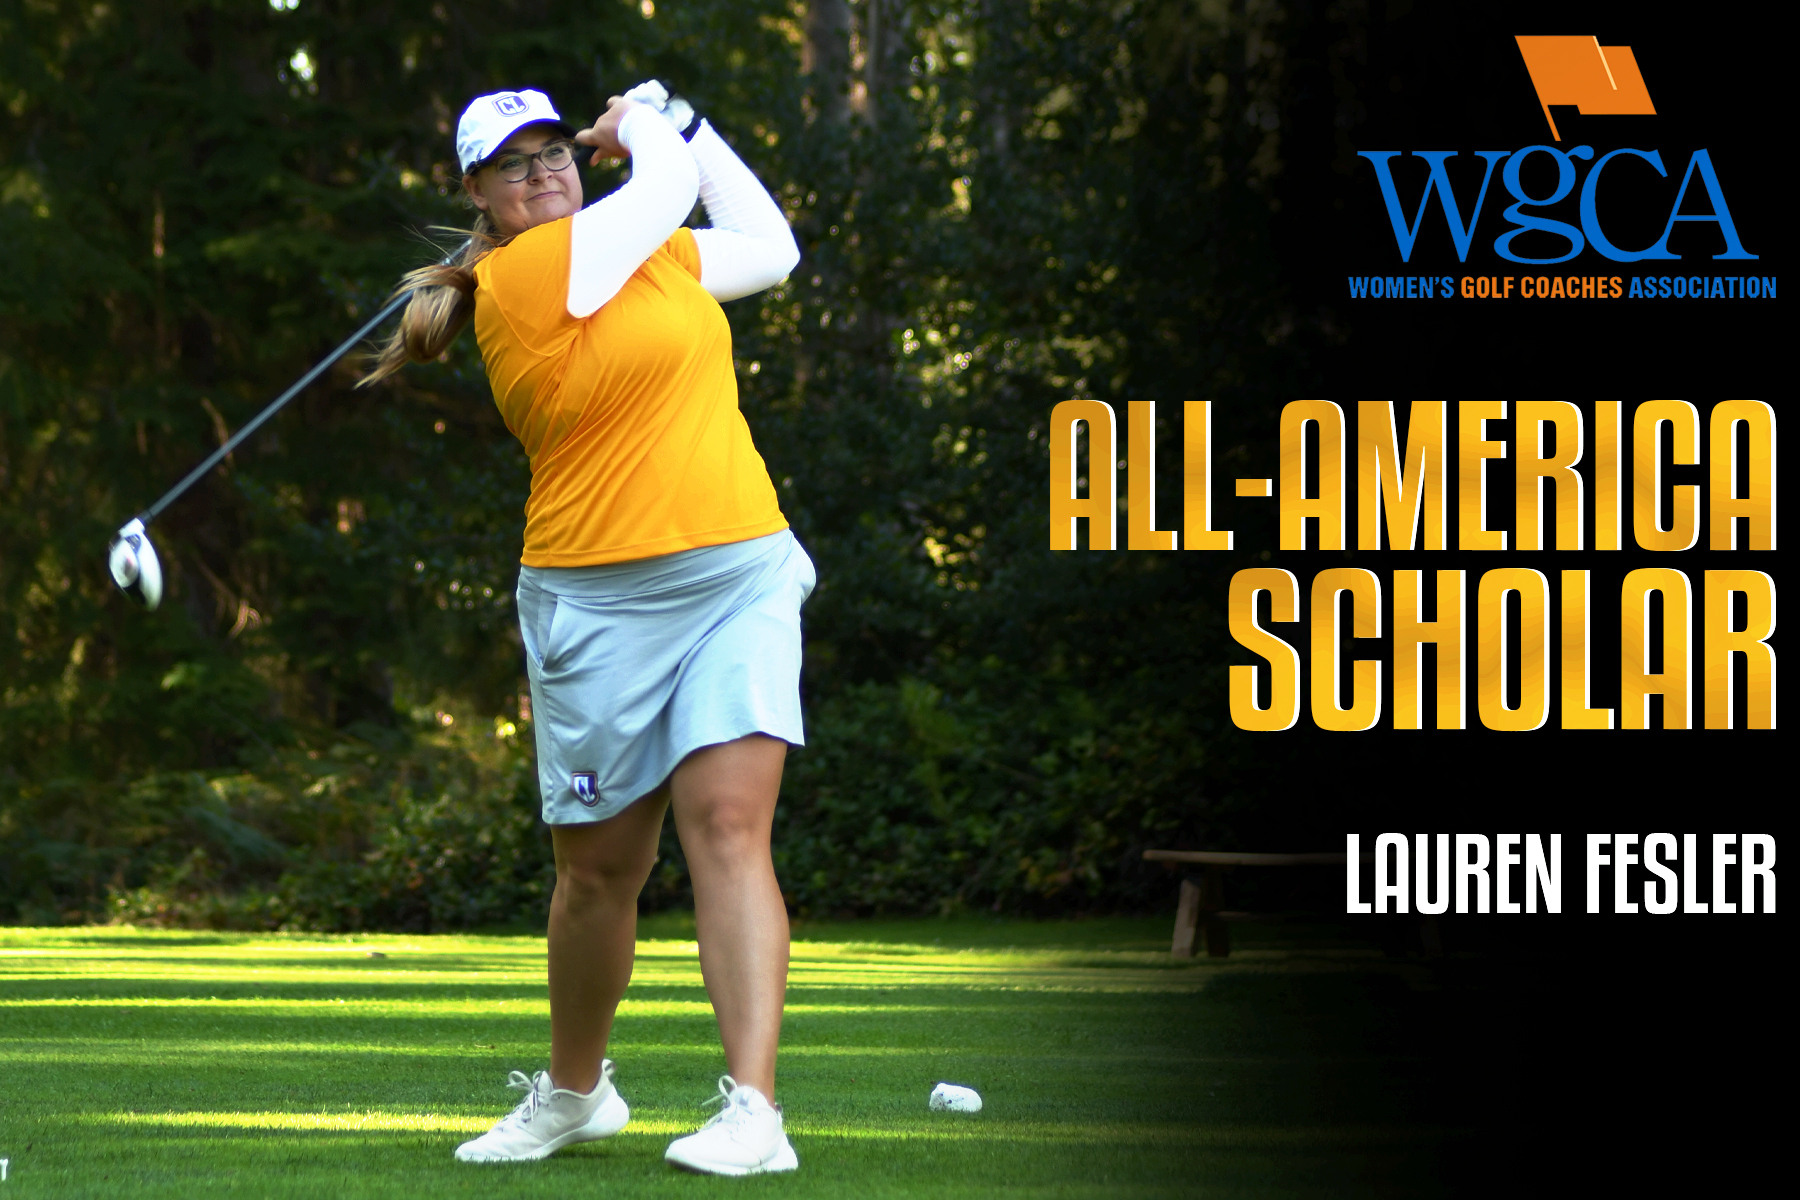 Fesler Earns All-American Scholar for Second Consecutive Year